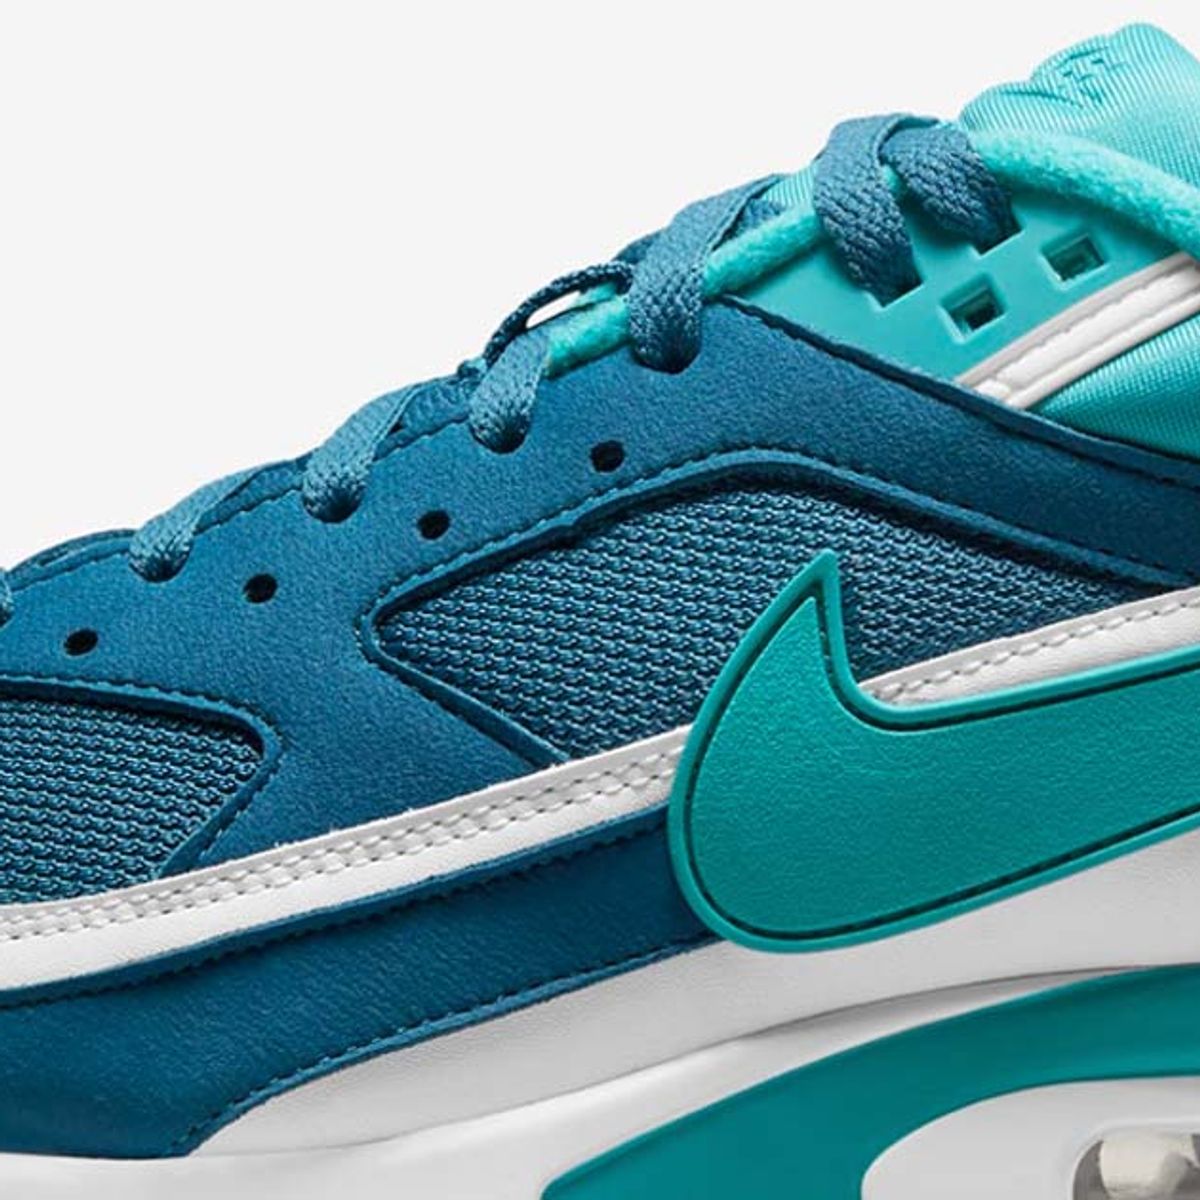 Nike Air Max BW Marina: A Stunning Reissue for its 30th Anniversary